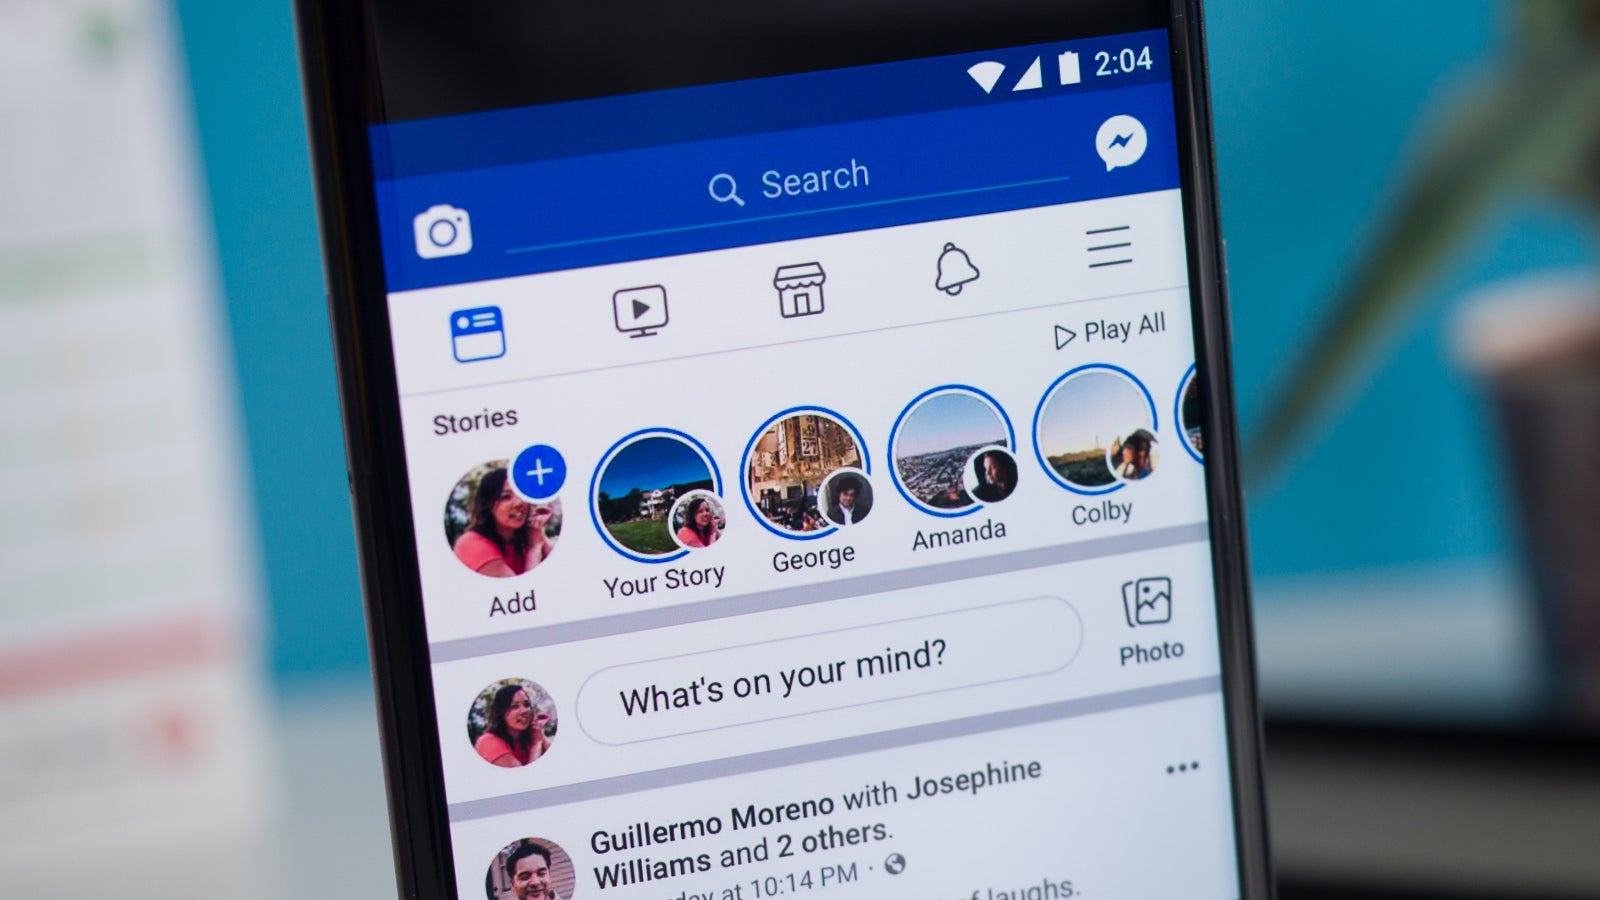 Facebook launches new privacy tools to protect teens